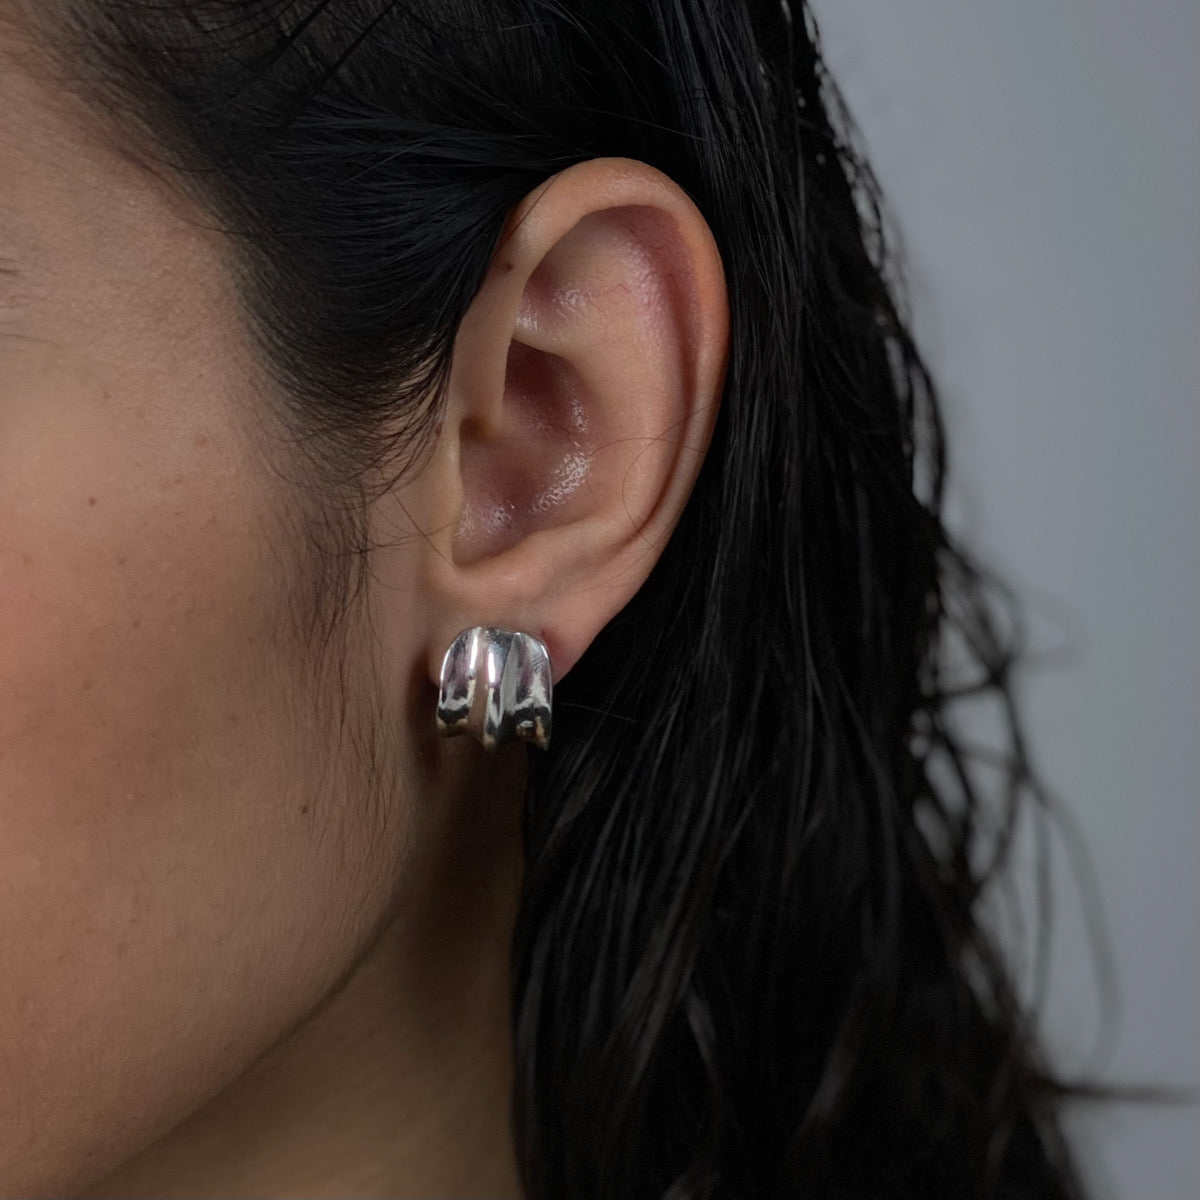 The Carved earrings are handmade, crafted from sterling silver 925. Their broad surface beautifully embraces the ear, providing a smooth and glossy finish. They are shipped within 2-10 business days.